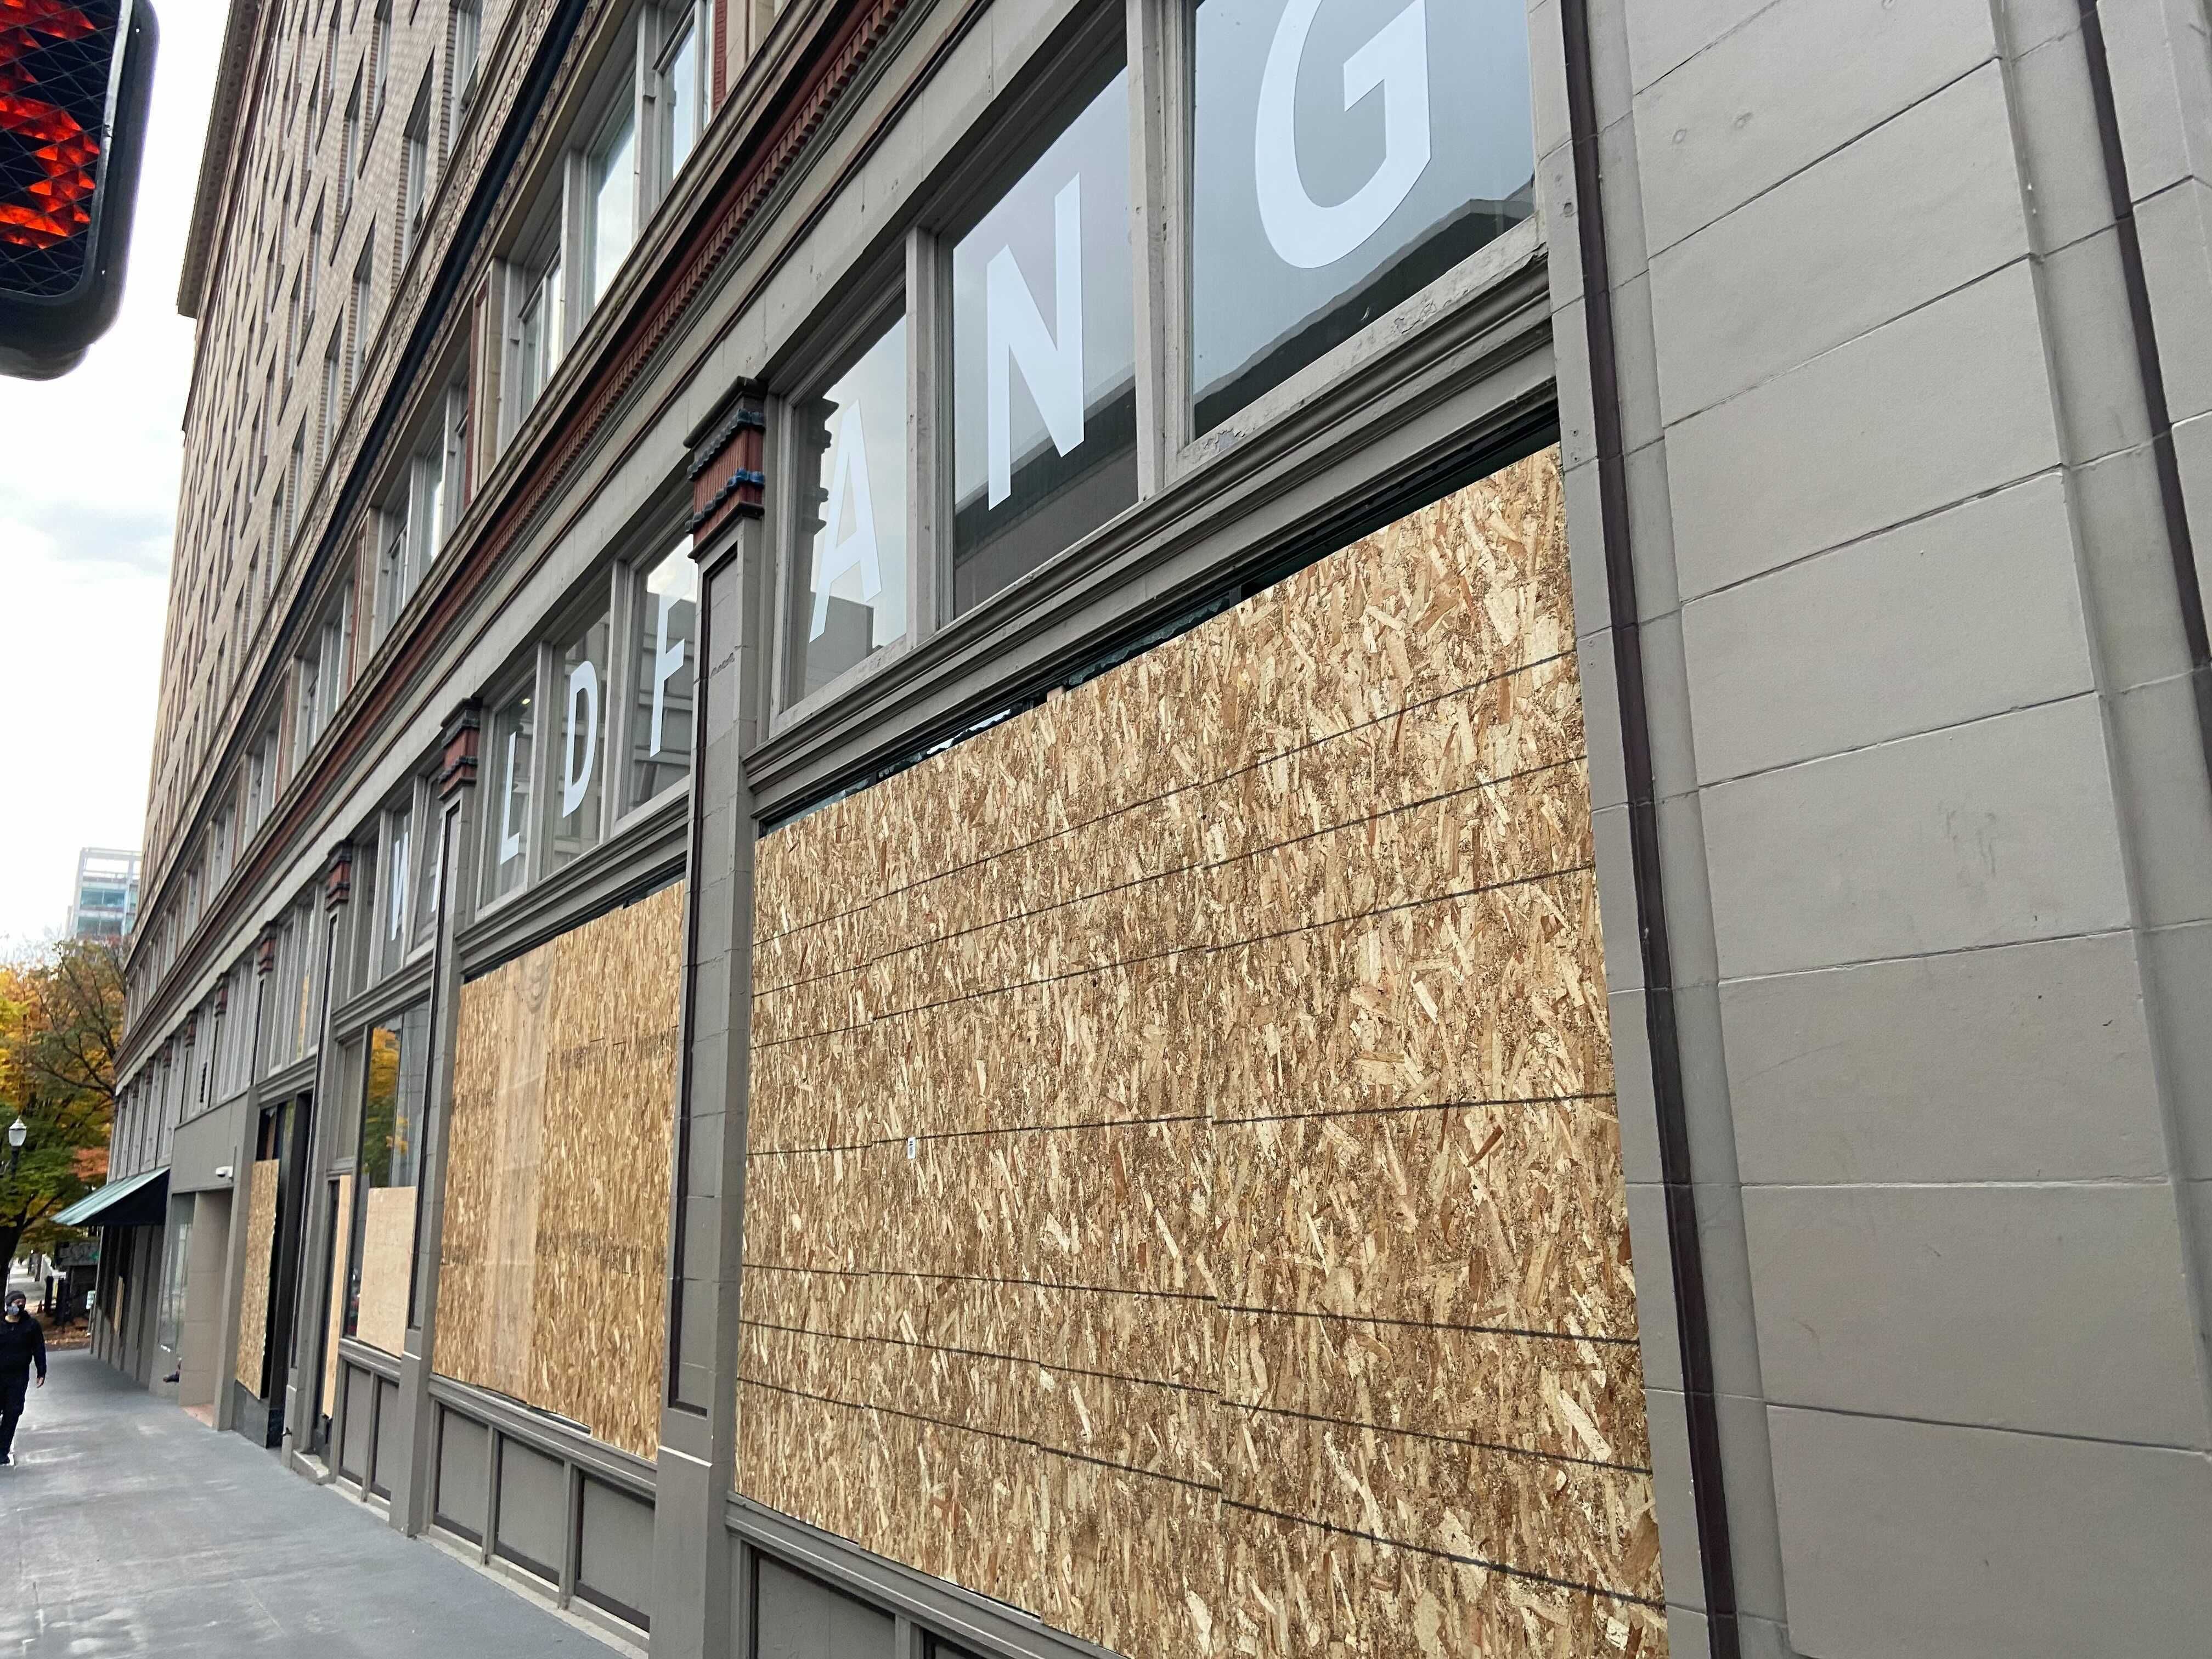 Photos: Damage to downtown Portland after overnight riot